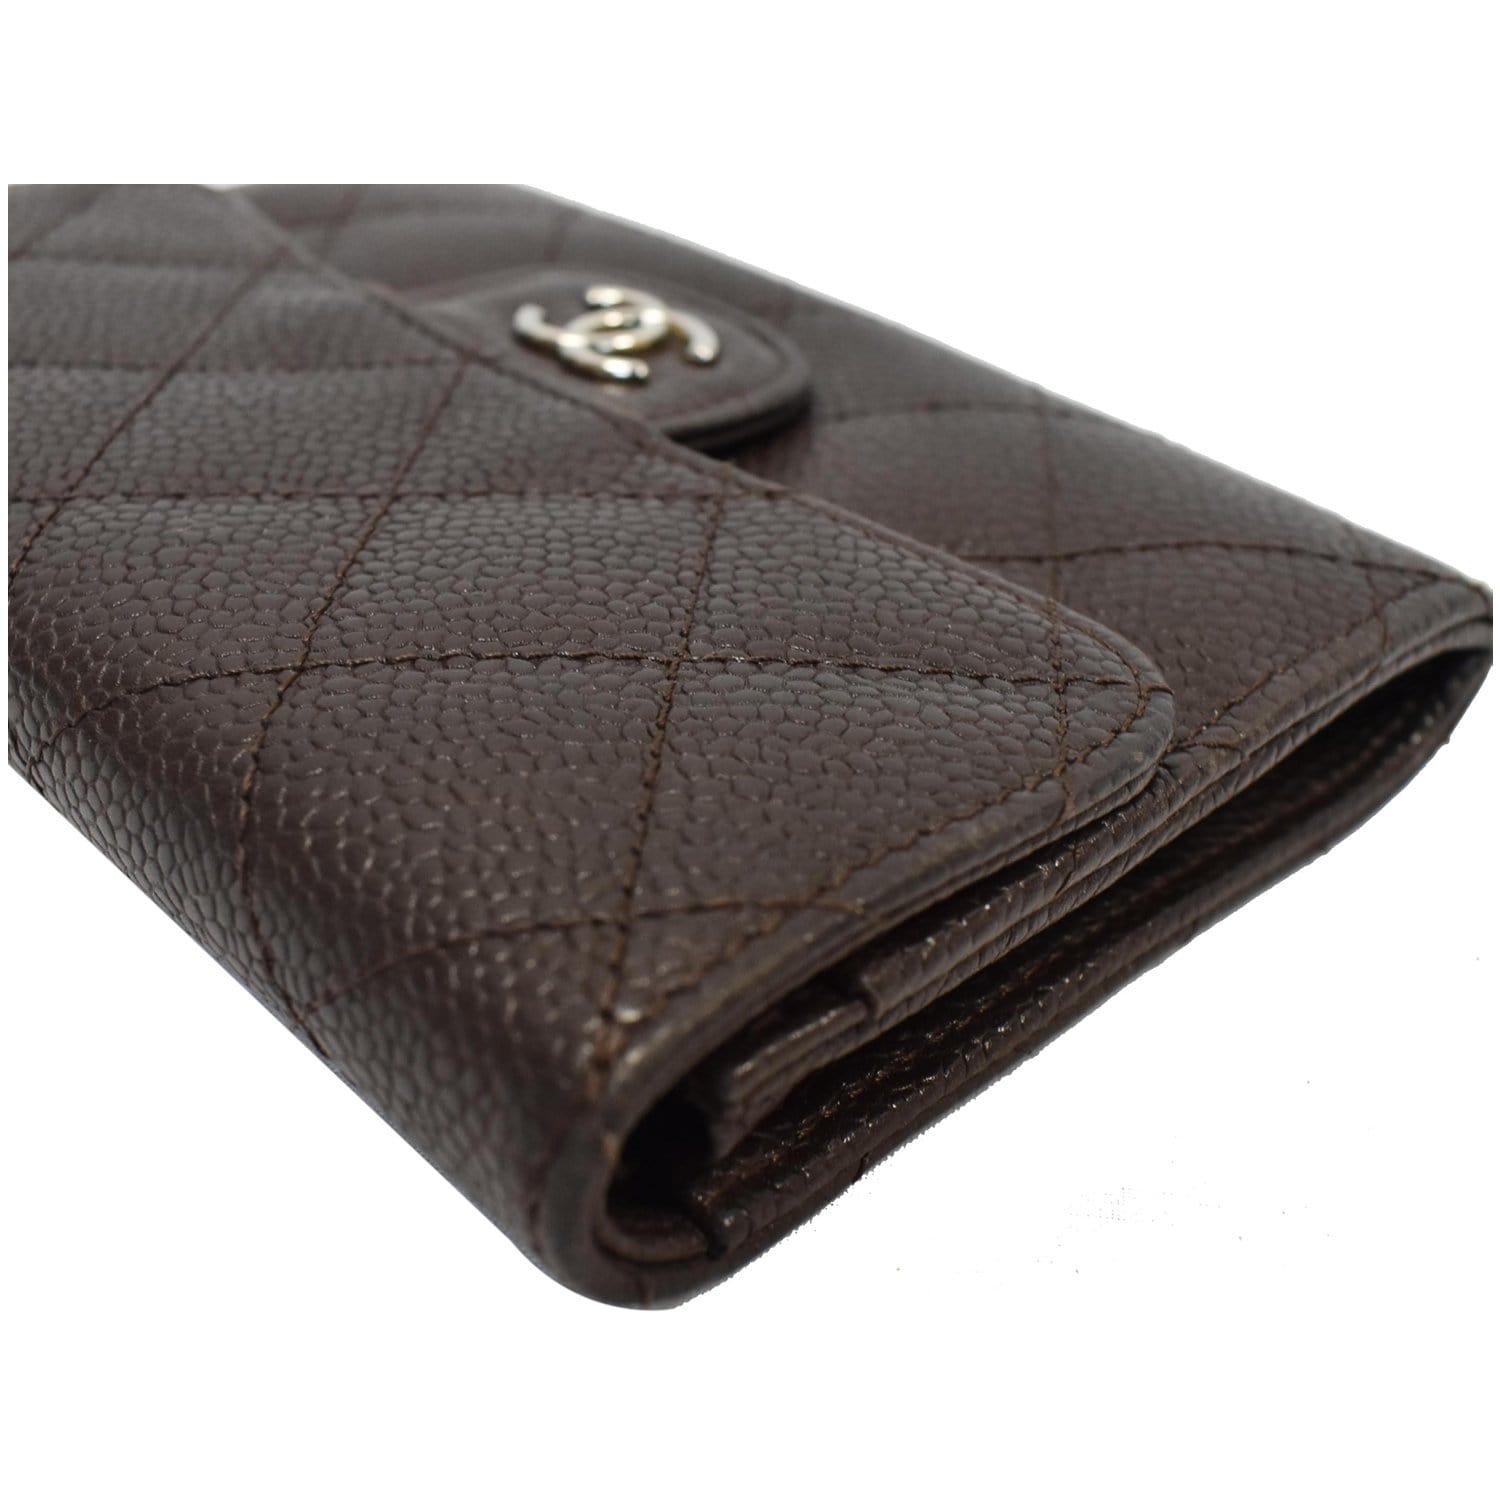 CHANEL Caviar Quilted Flap Card Holder Wallet Beige 1271429